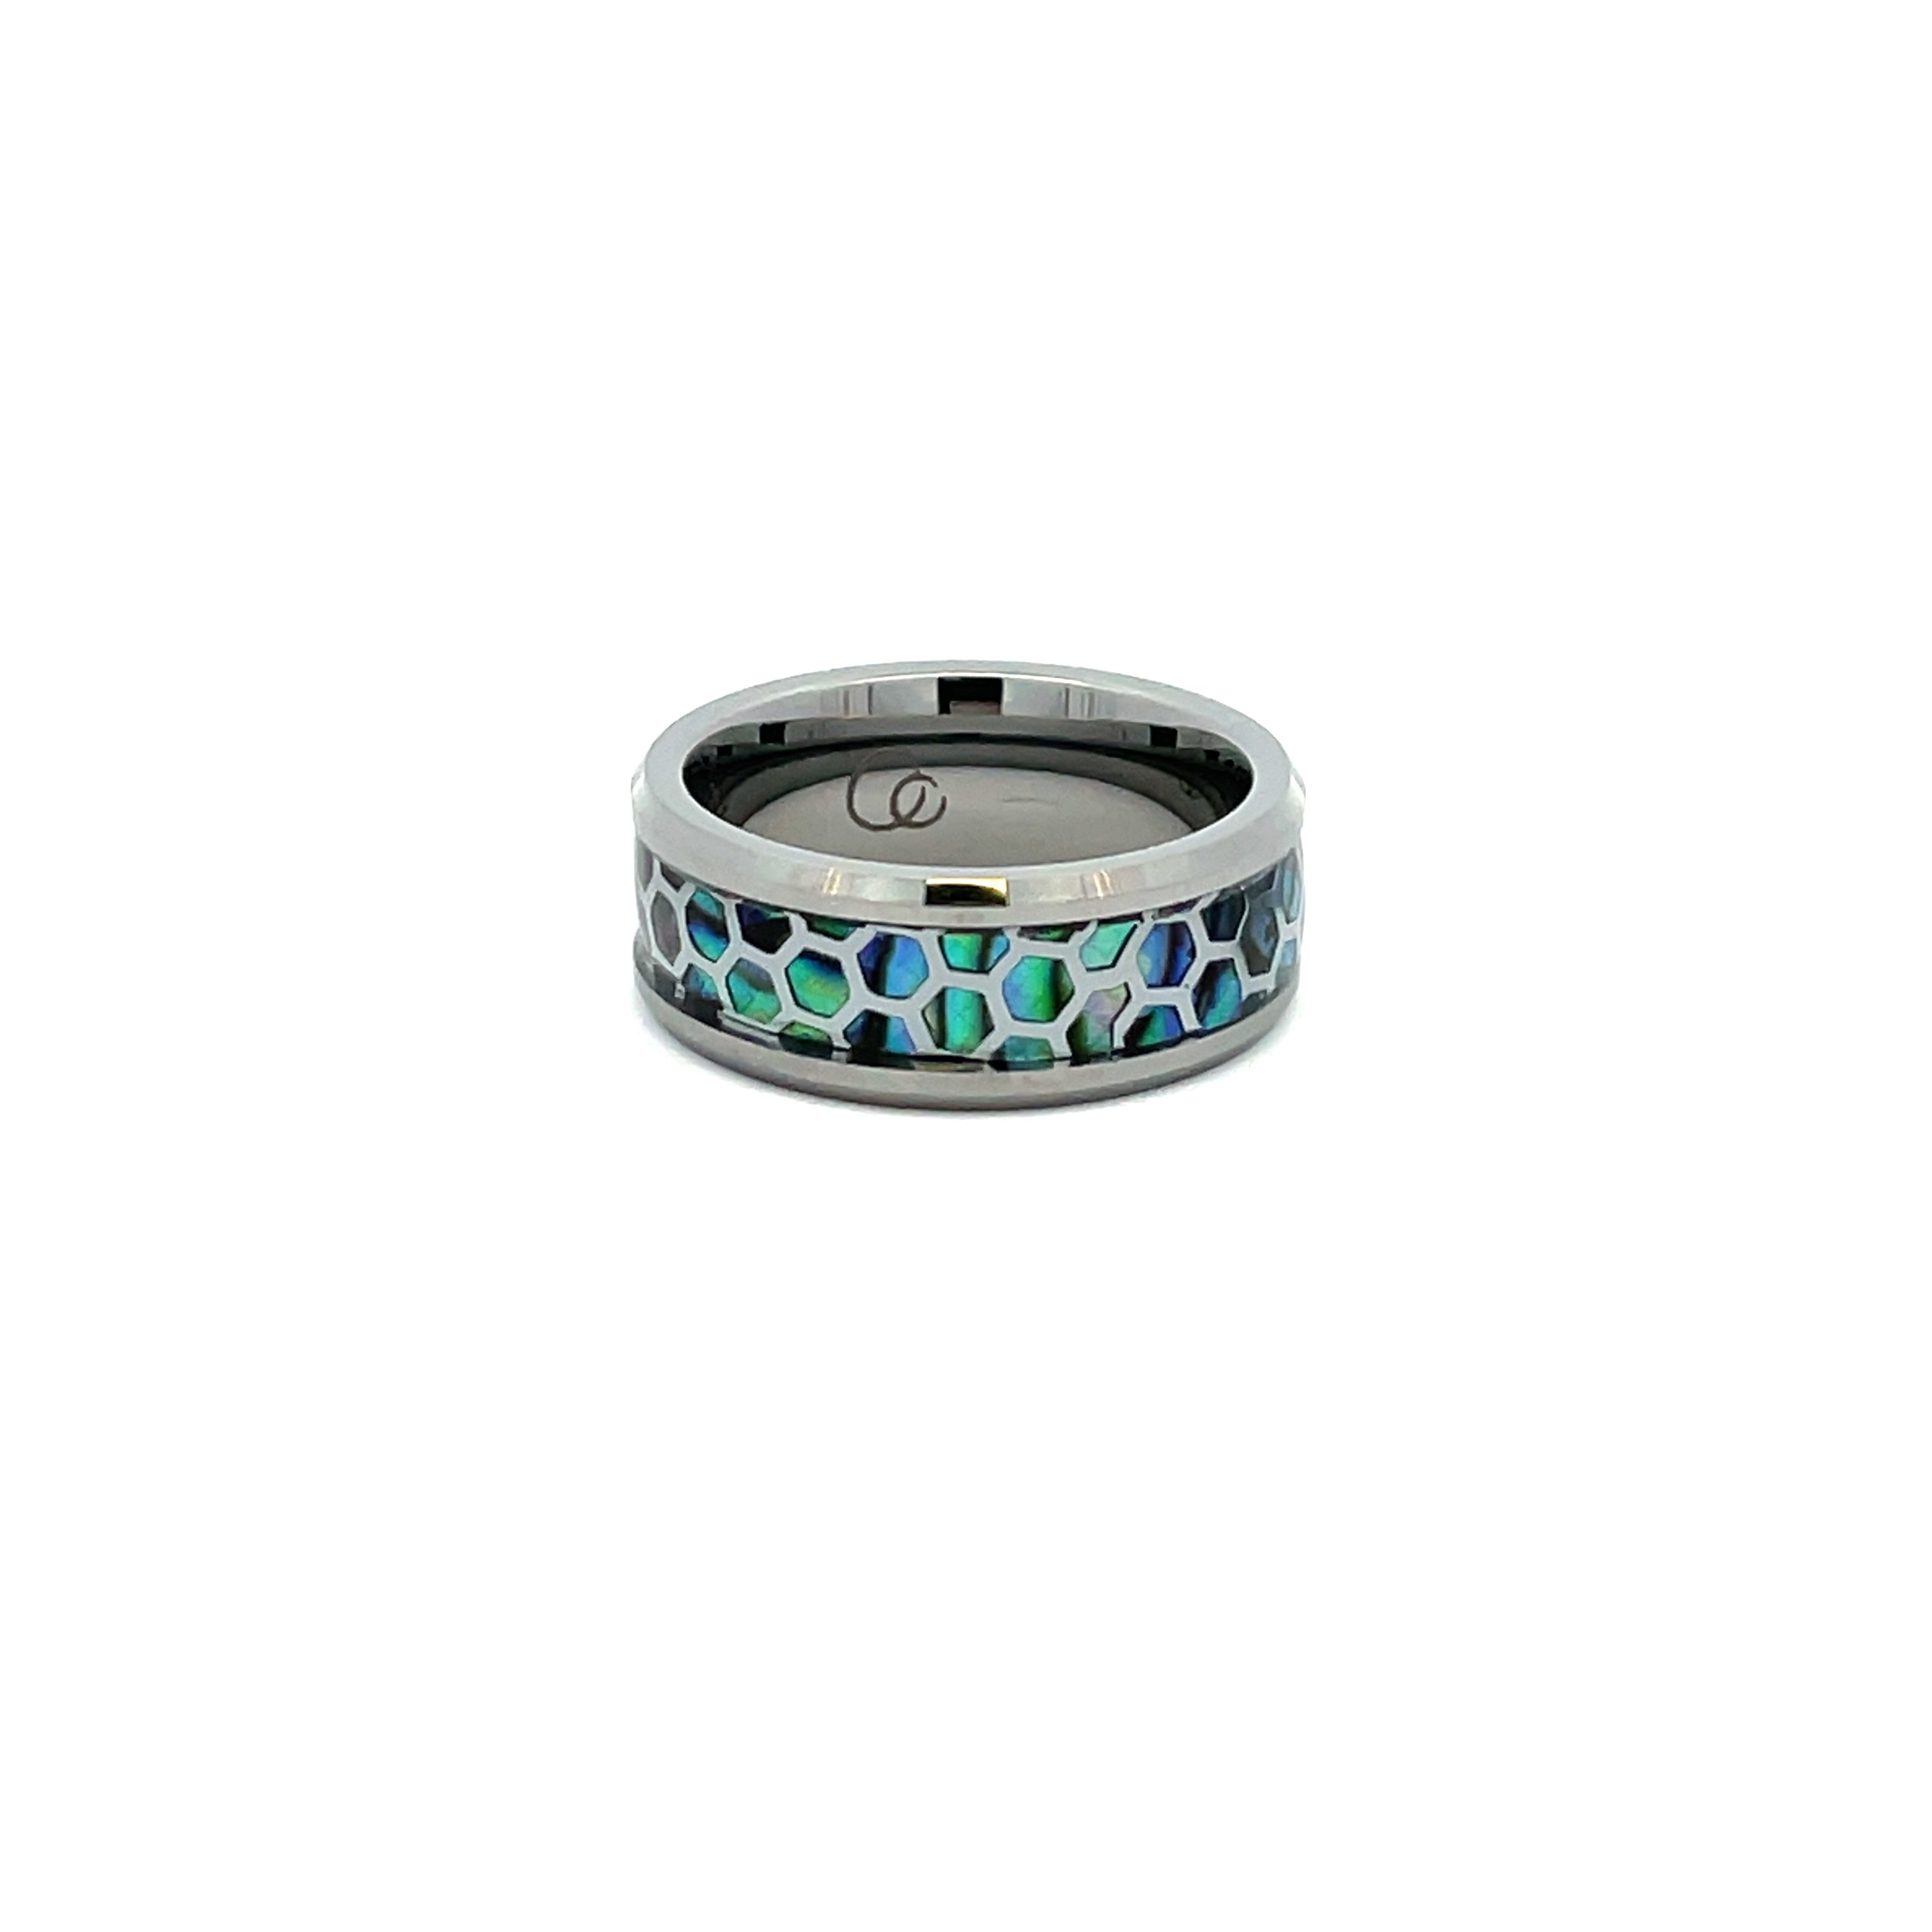 Tungsten Ring With Patterned Abalone Shell